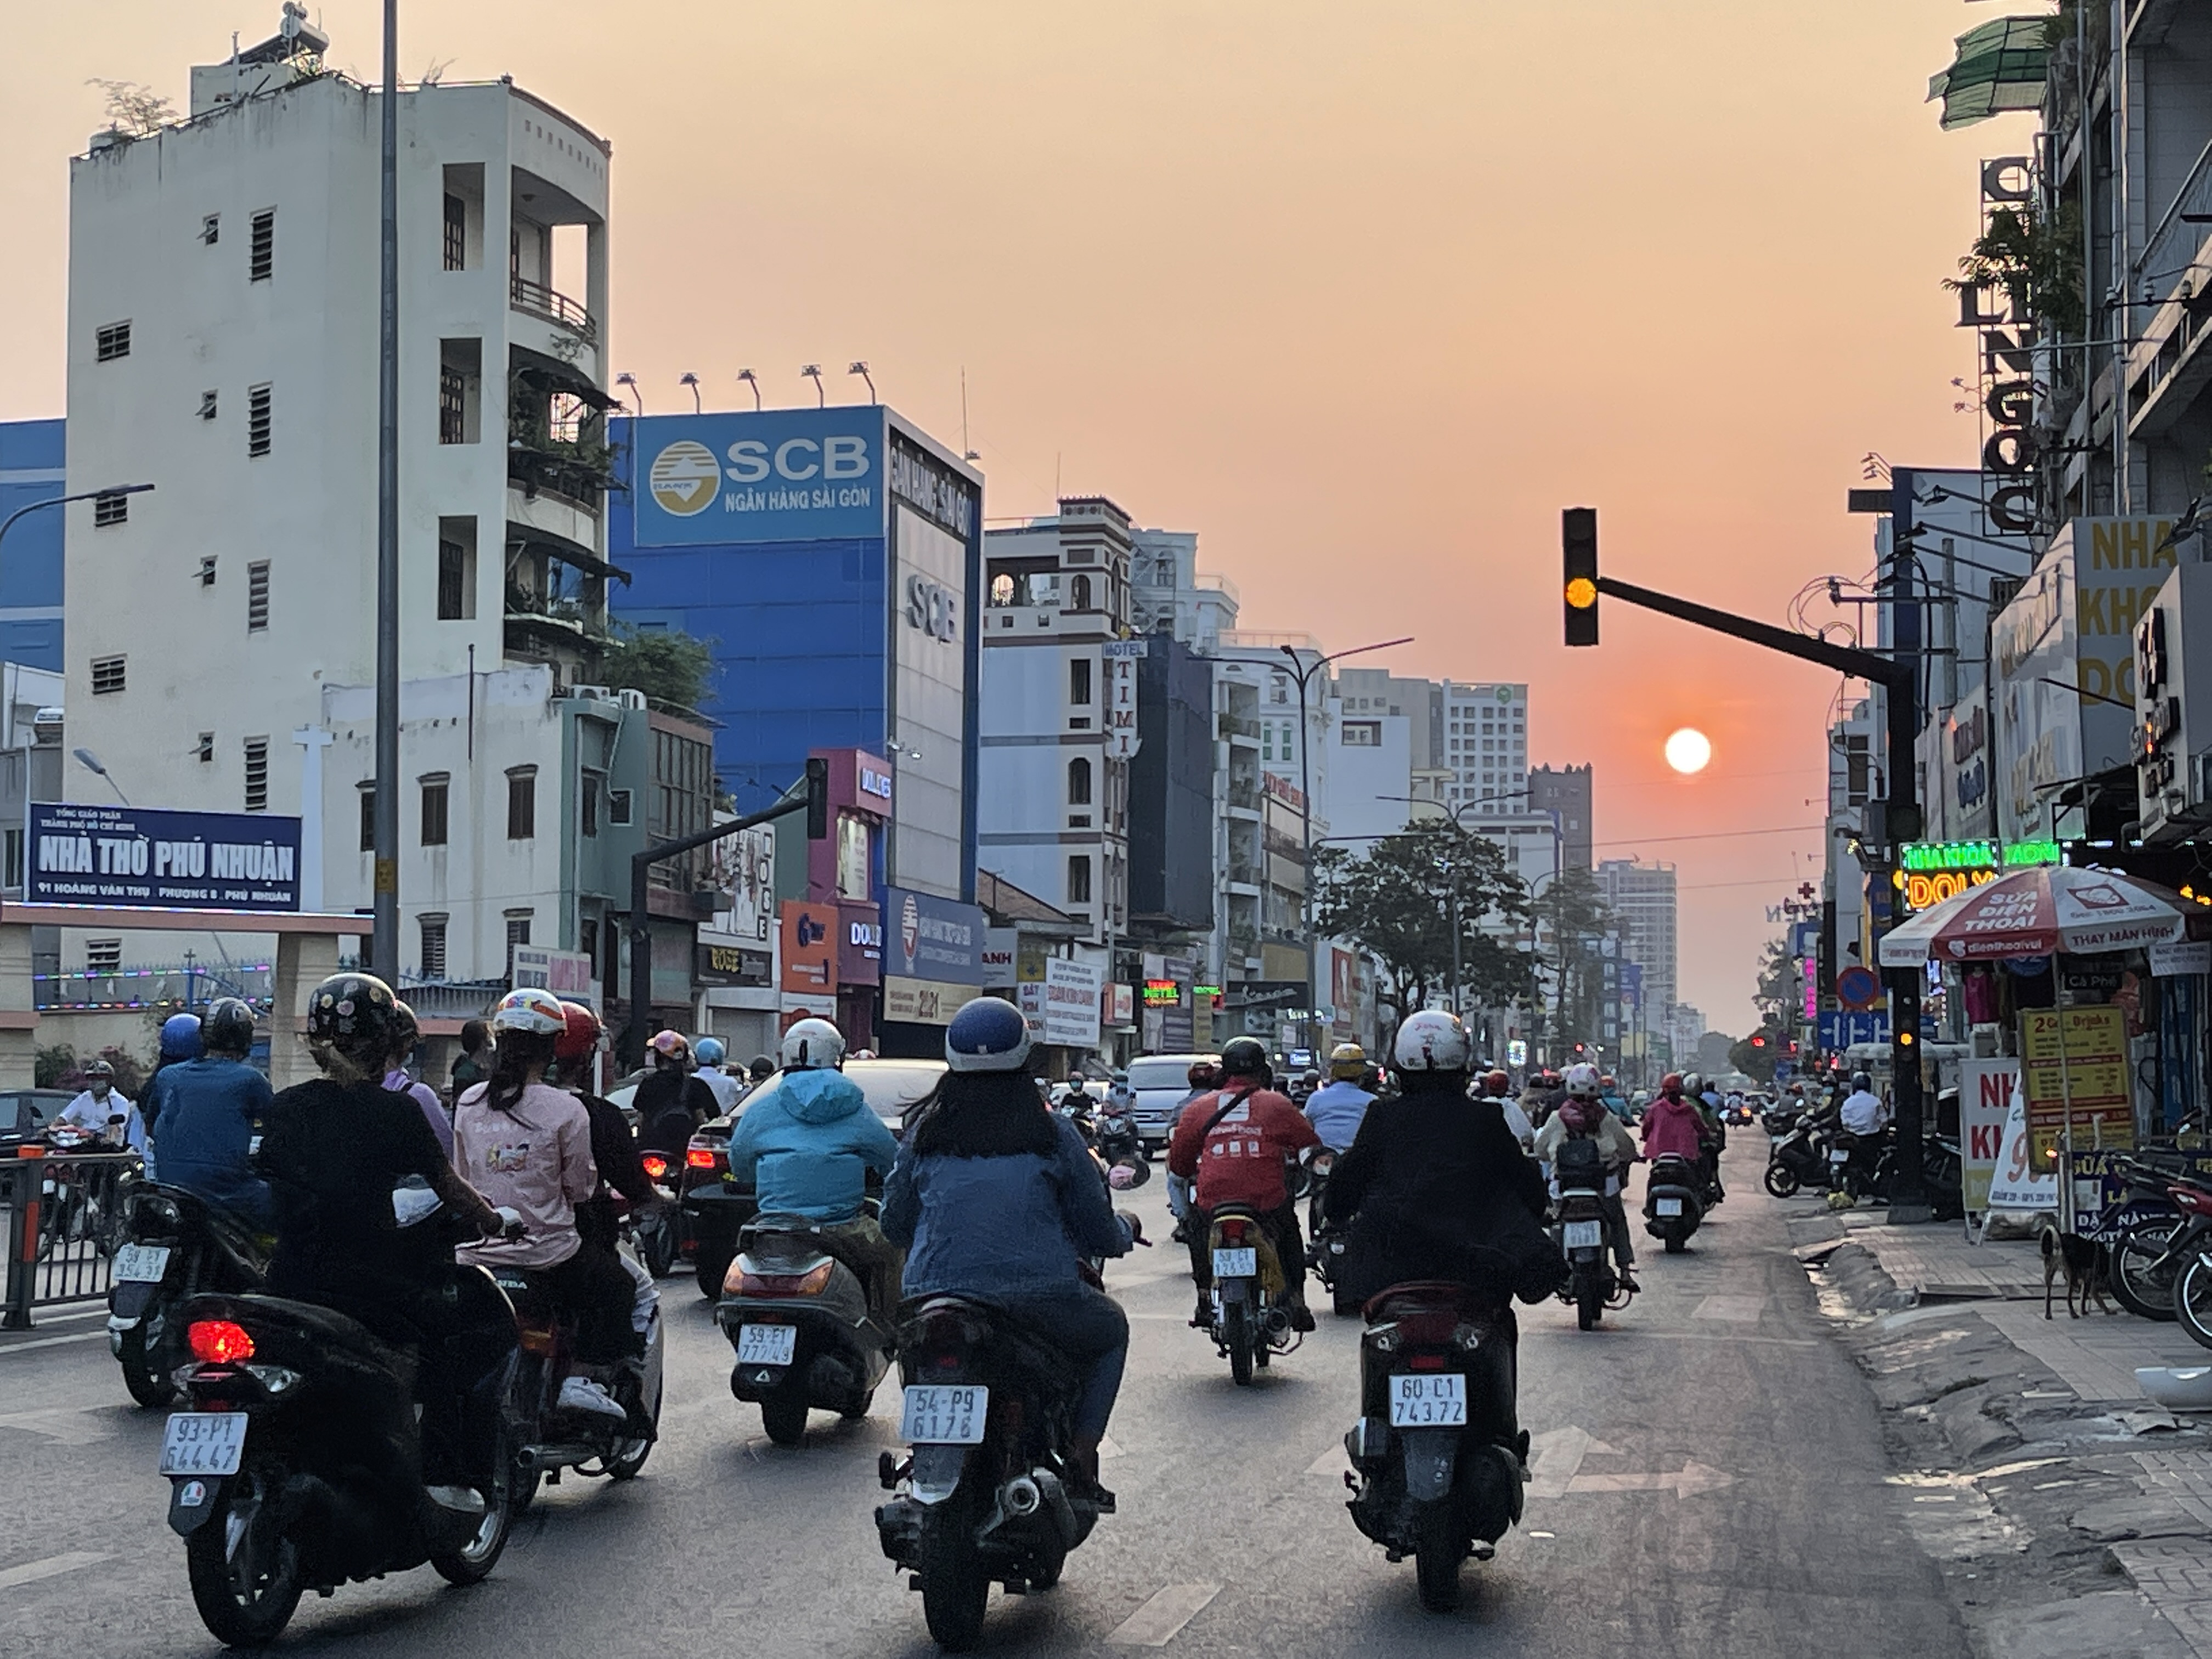 Commuters travel by motorbikes on Hoang Van Thu Street in Phu Nhuan District, Ho Chi Minh City. Photo: Dong Nguyen / Tuoi Tre News